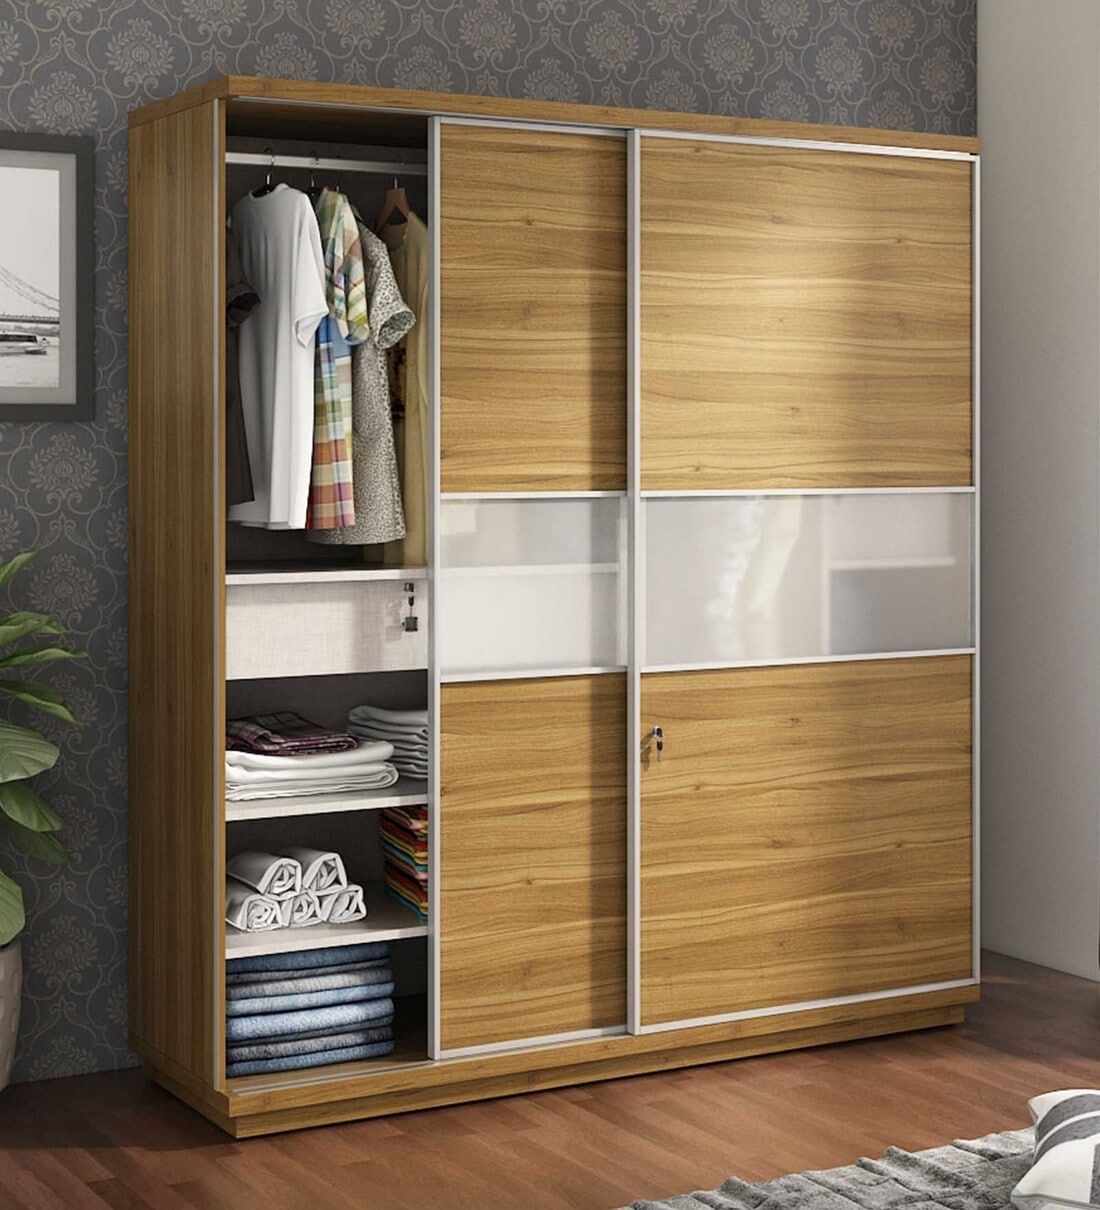 Buy Kosmo Universal Sliding Door Wardrobe In Natural Teak At 33% Off Spacewood | Pepperfry With Wardrobes With 2 Sliding Doors (View 6 of 15)